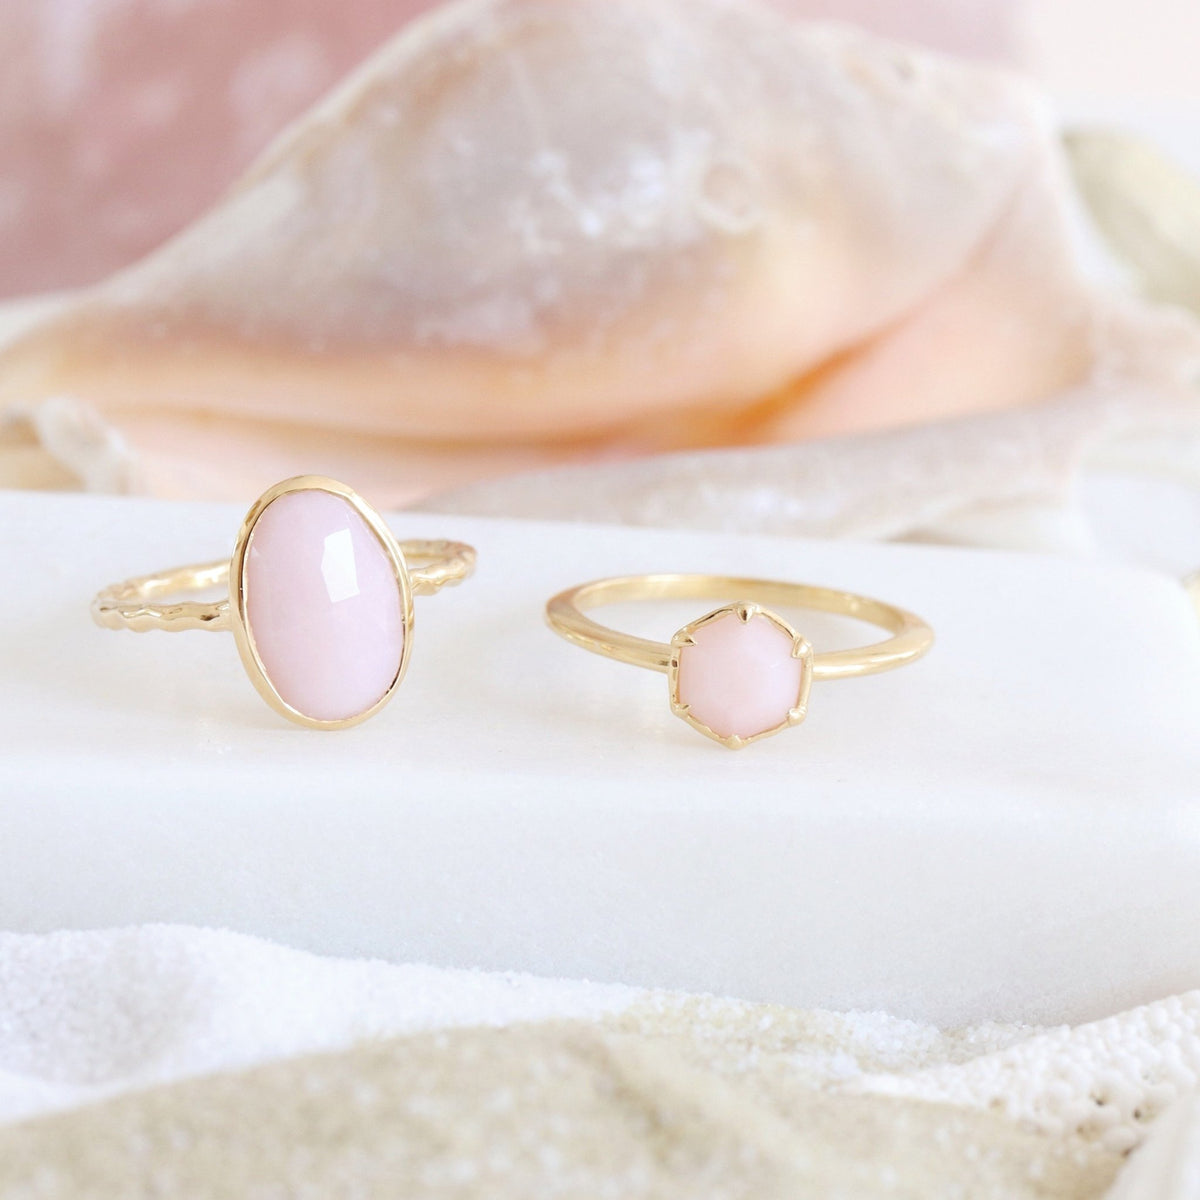 PROTECT OVAL RING - PINK OPAL &amp; GOLD - SO PRETTY CARA COTTER